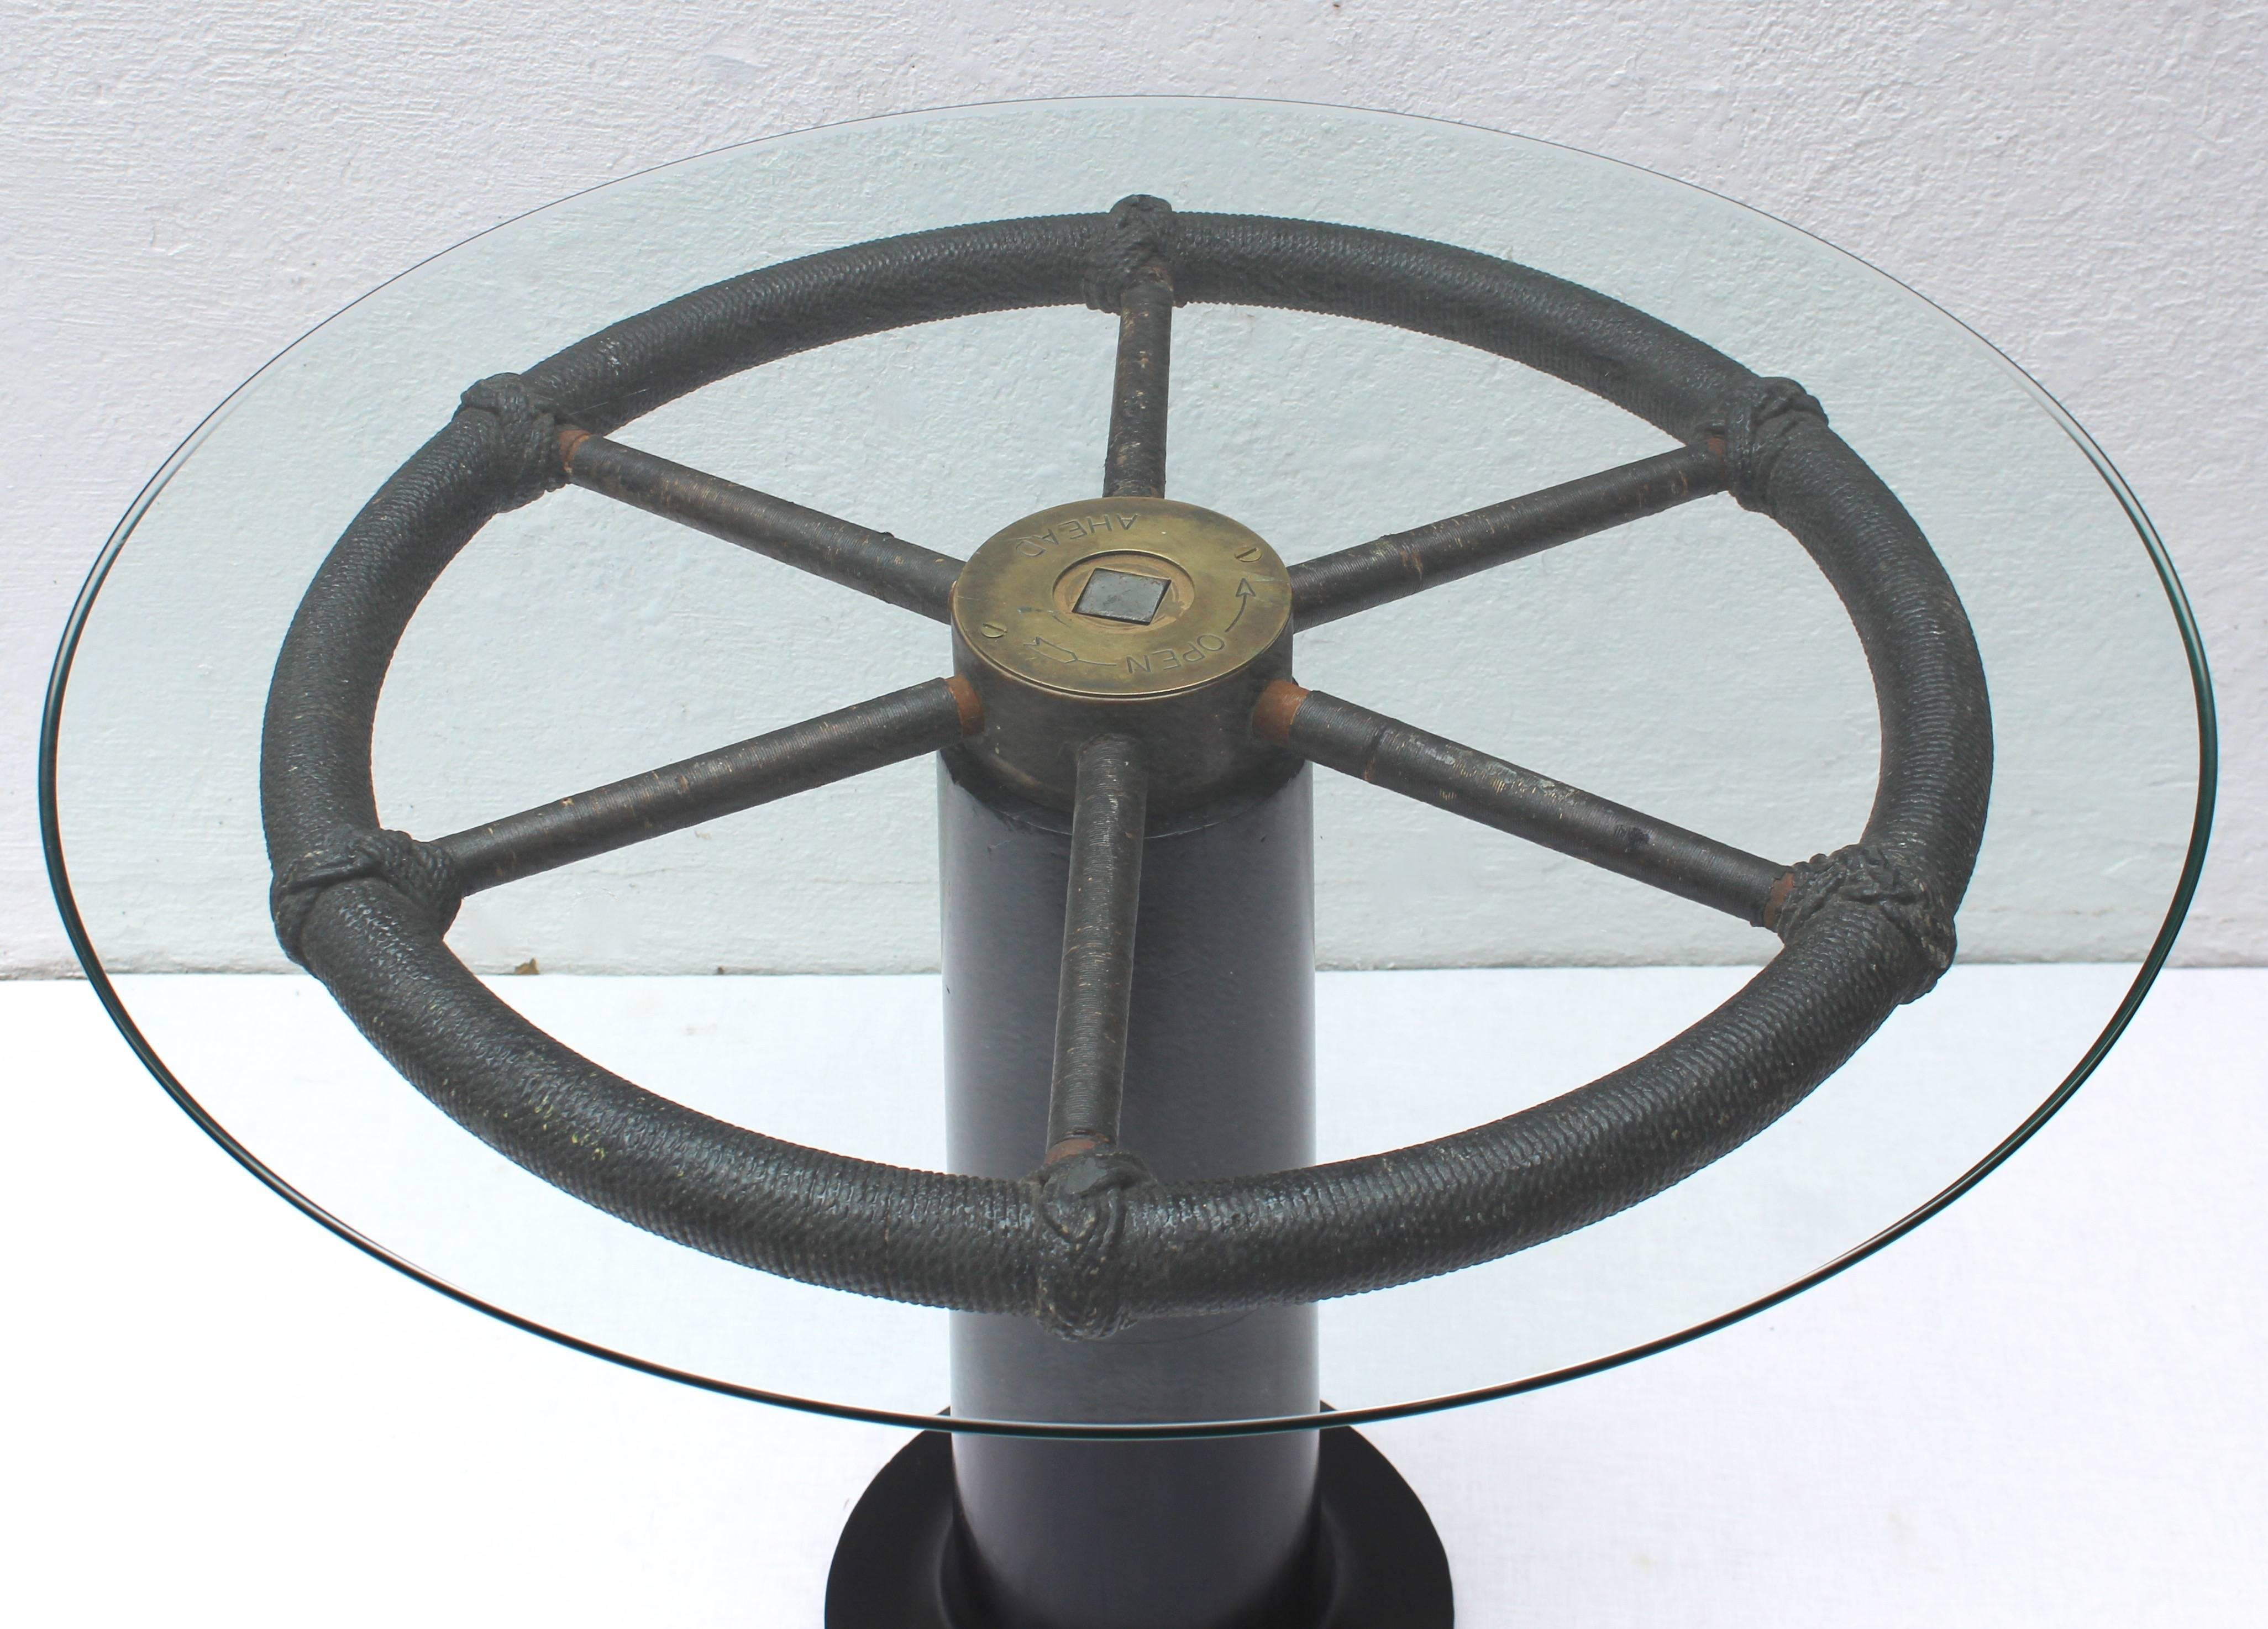 Wonderful and unique nautical table created with authentic ship's wheel mounted on ebonized wood pedestal base with a glass top.